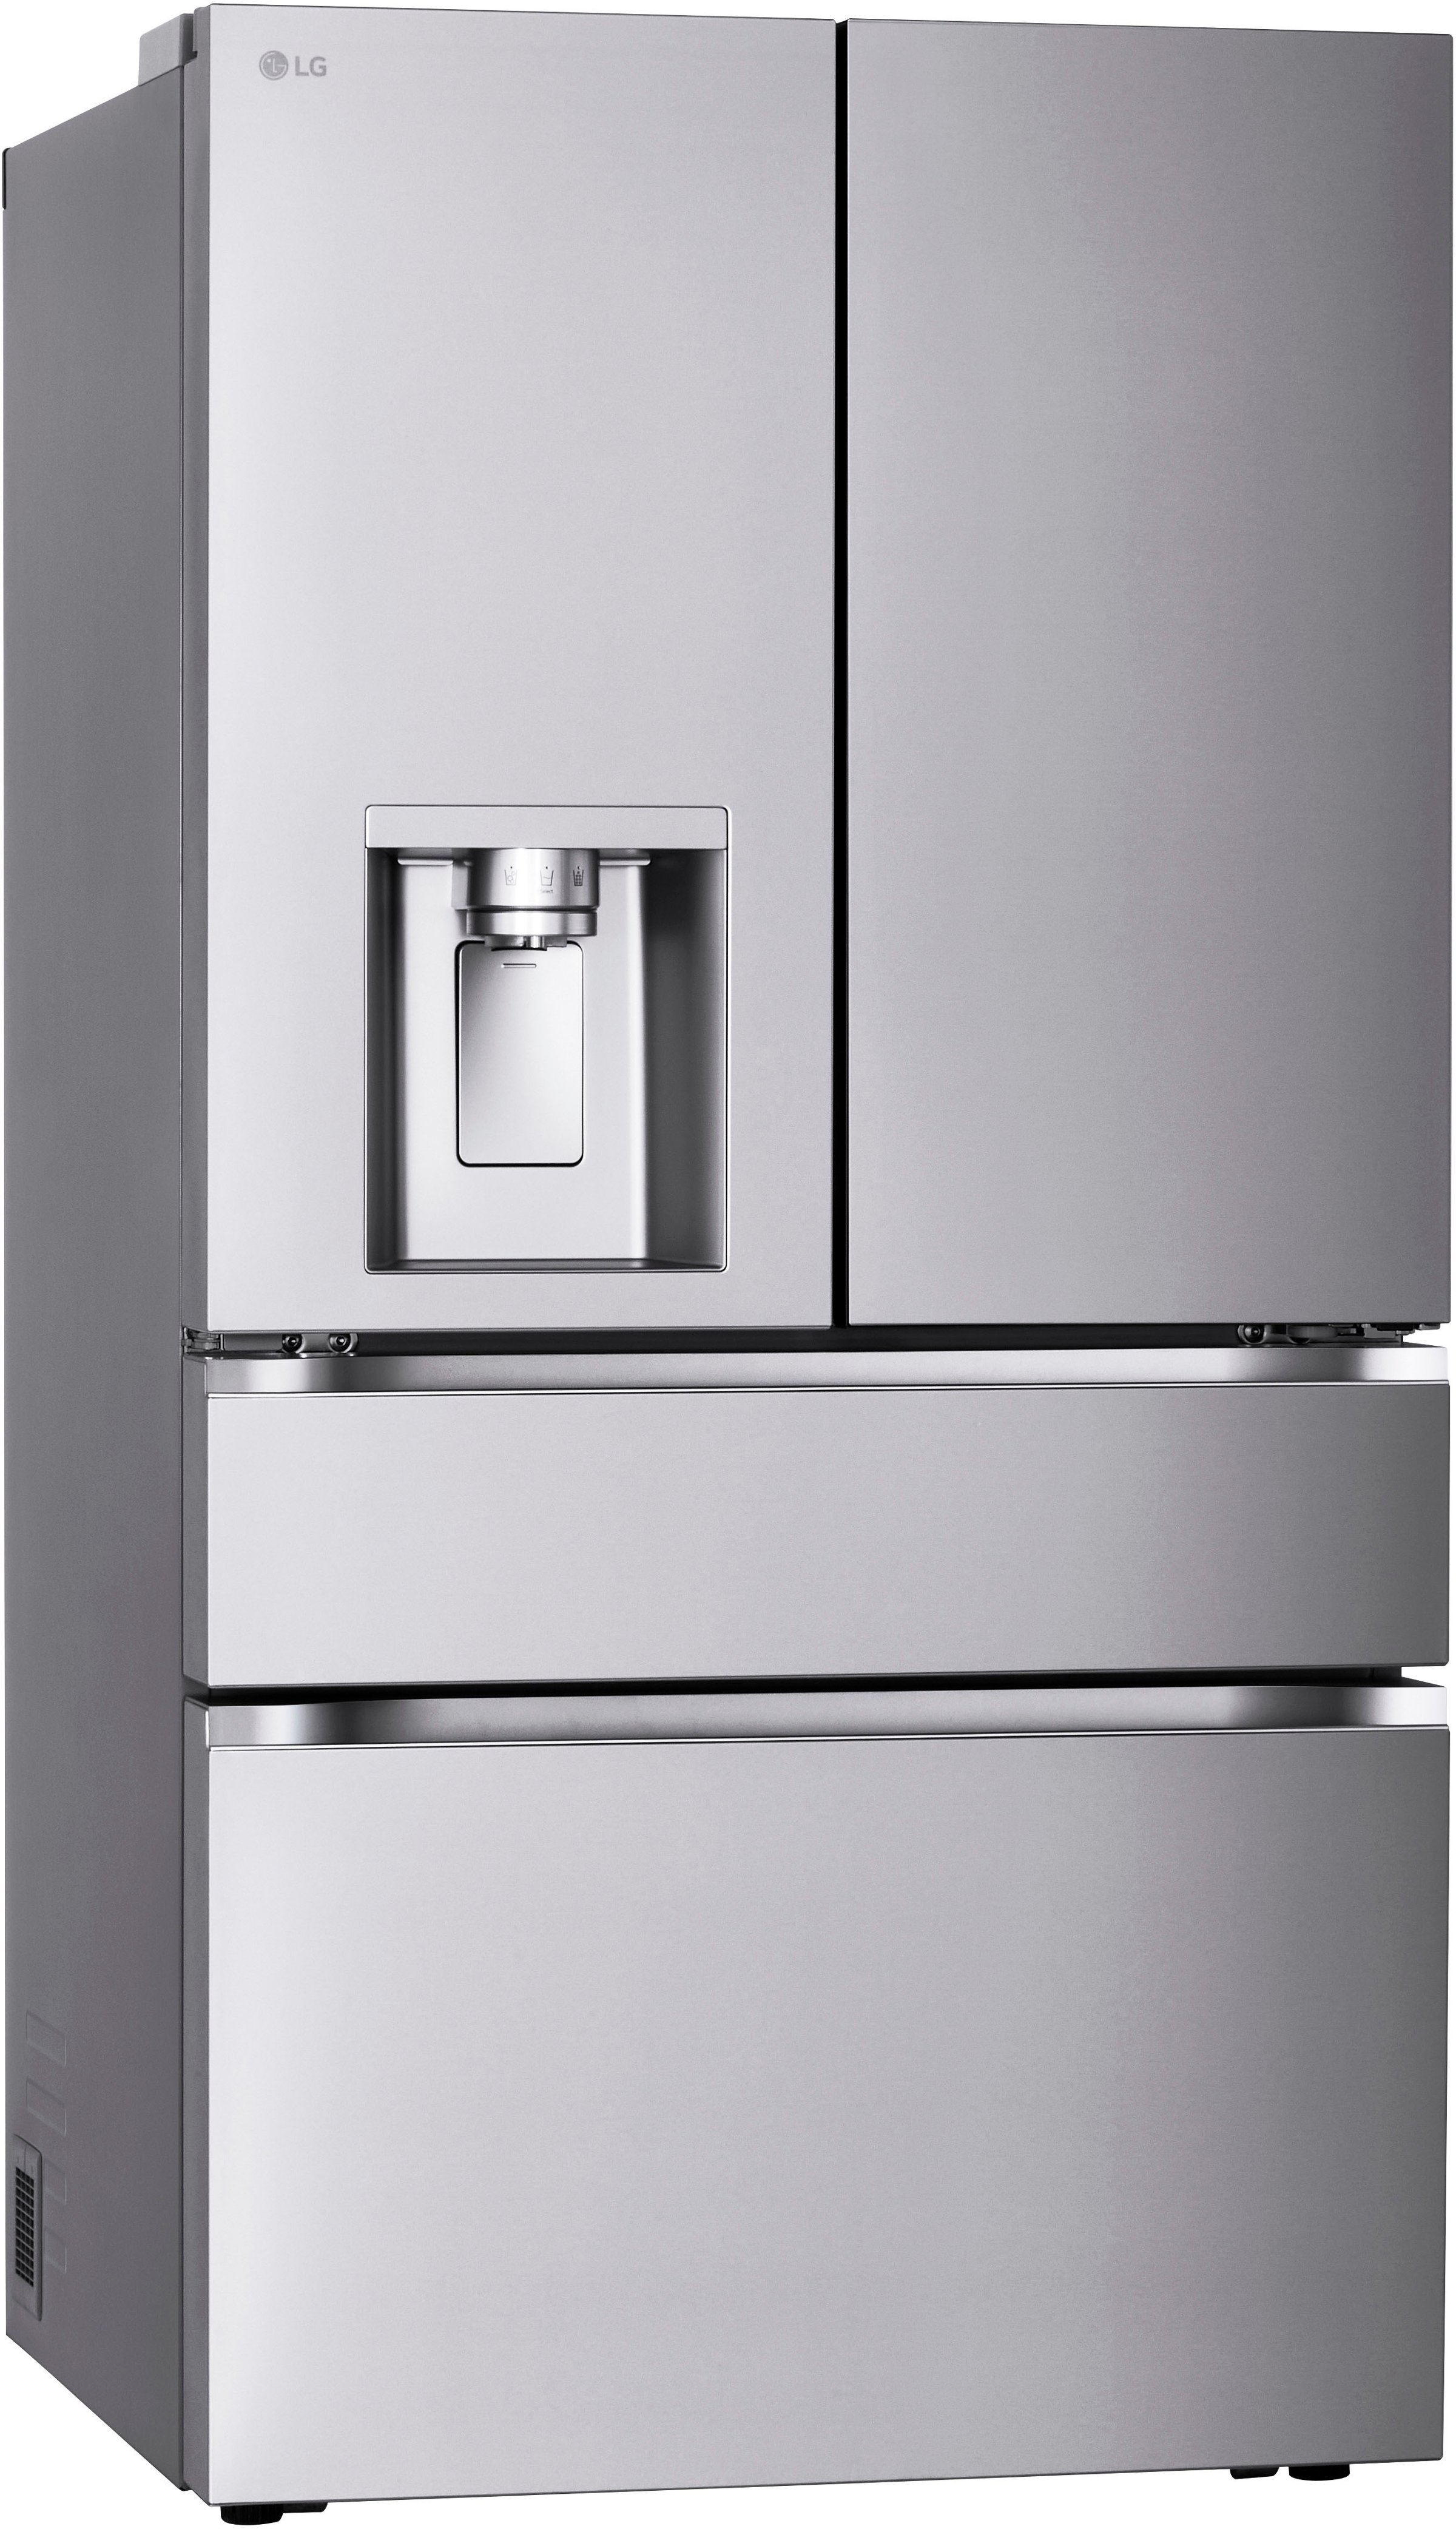 Angle View: LG - 28.6 Cu. Ft. French Door Smart Refrigerator with Full-Convert Drawer - Stainless Steel